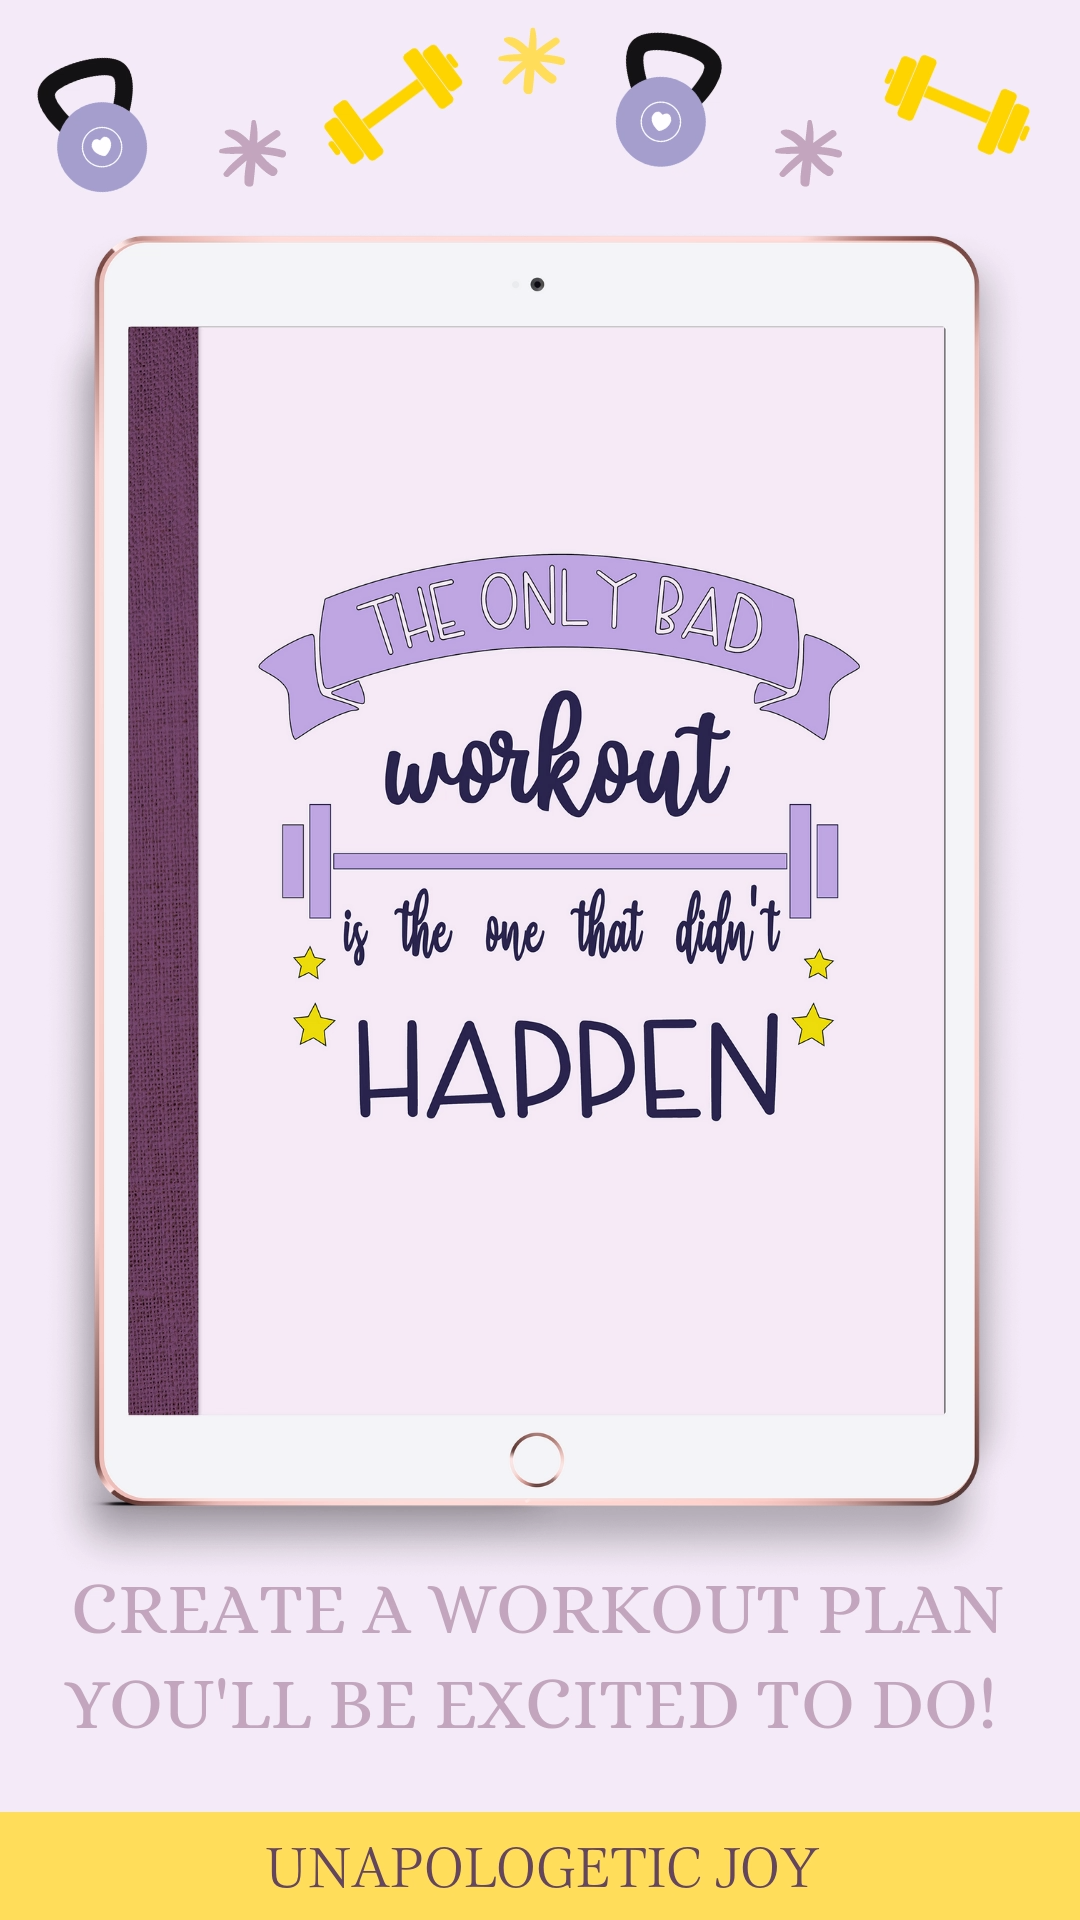 No Bad Workout Digital Fitness Planner - No Bad Workout Digital Fitness Planner -   17 fitness Planner notebooks ideas